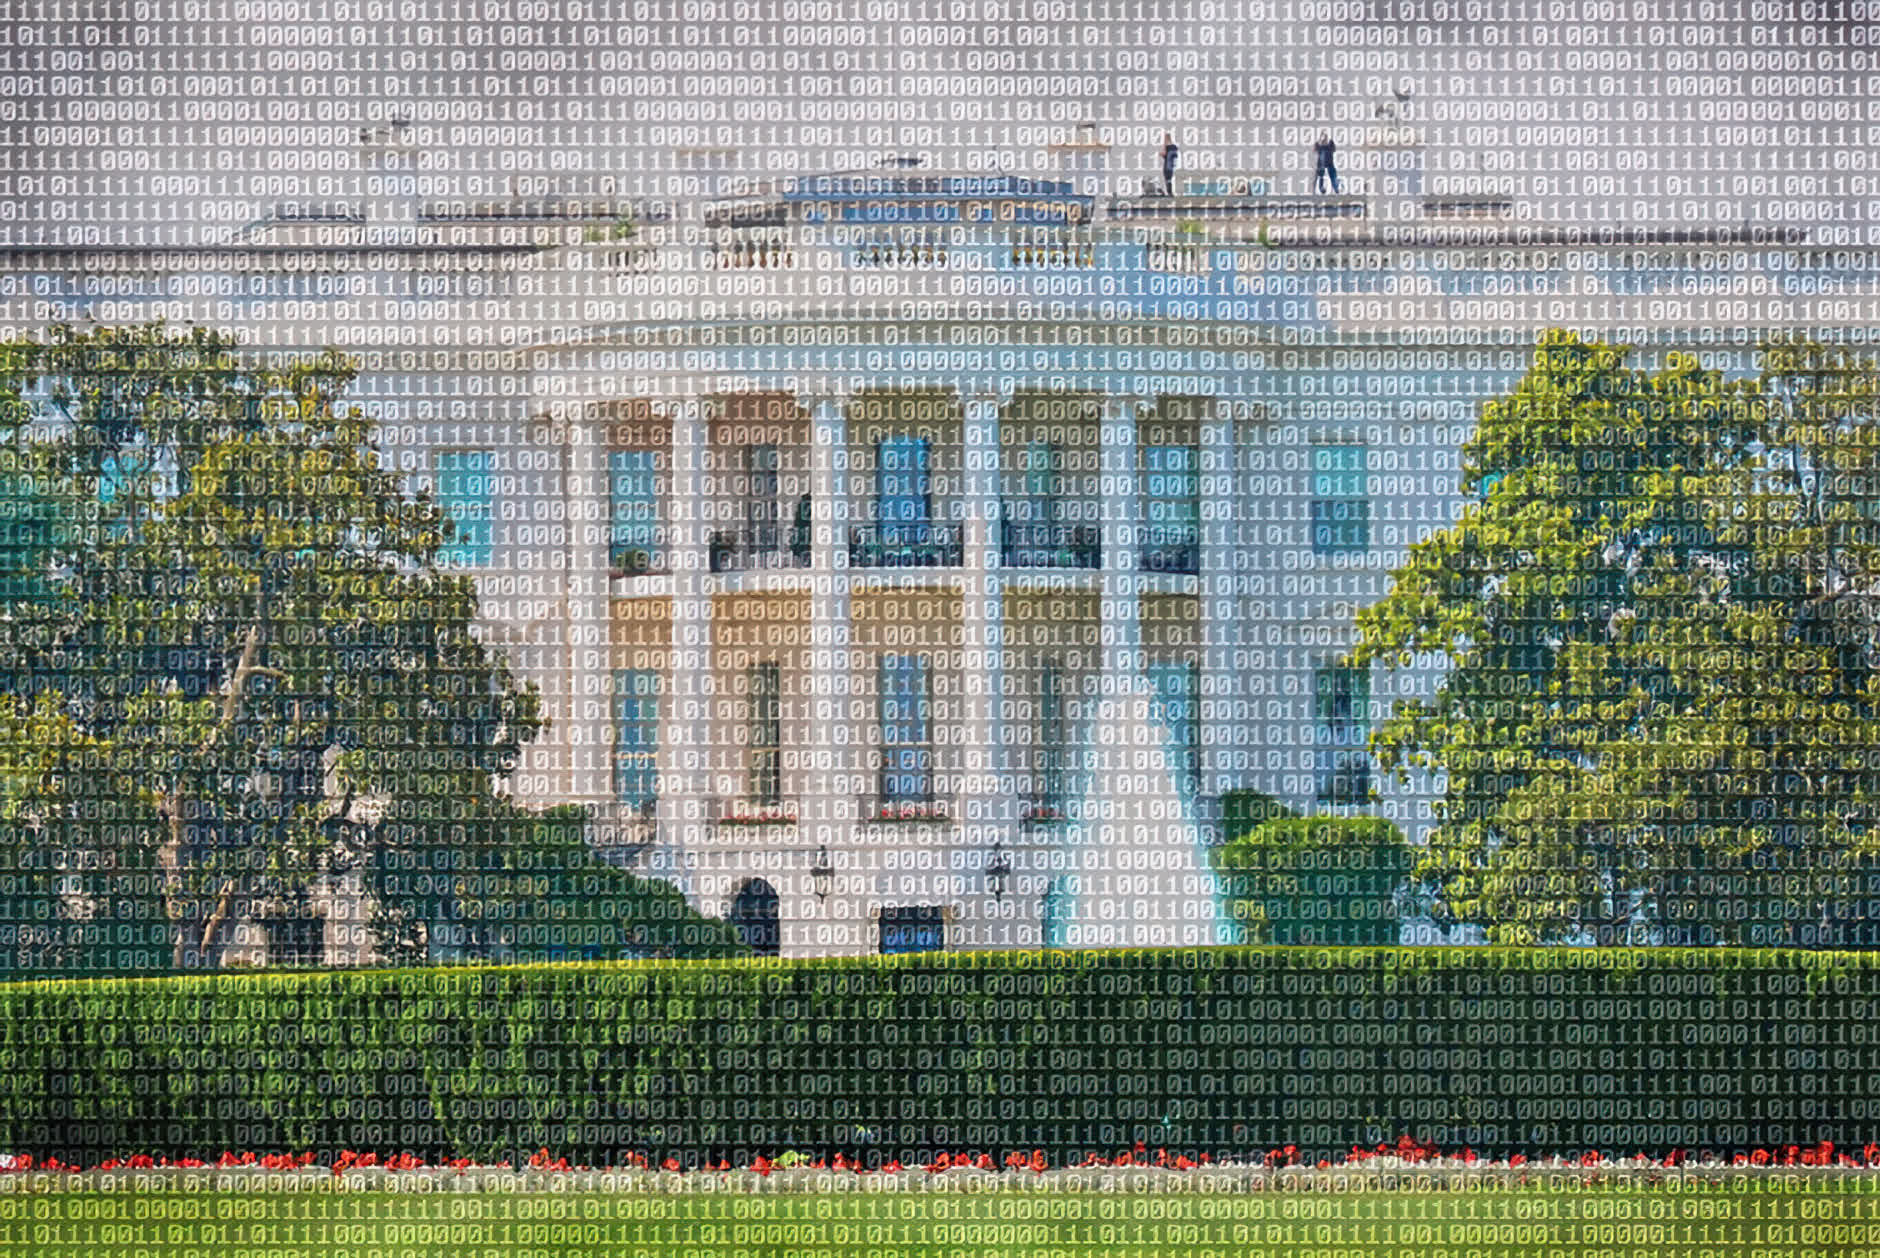 The White House unveils a Bill of Rights for artificial intelligence